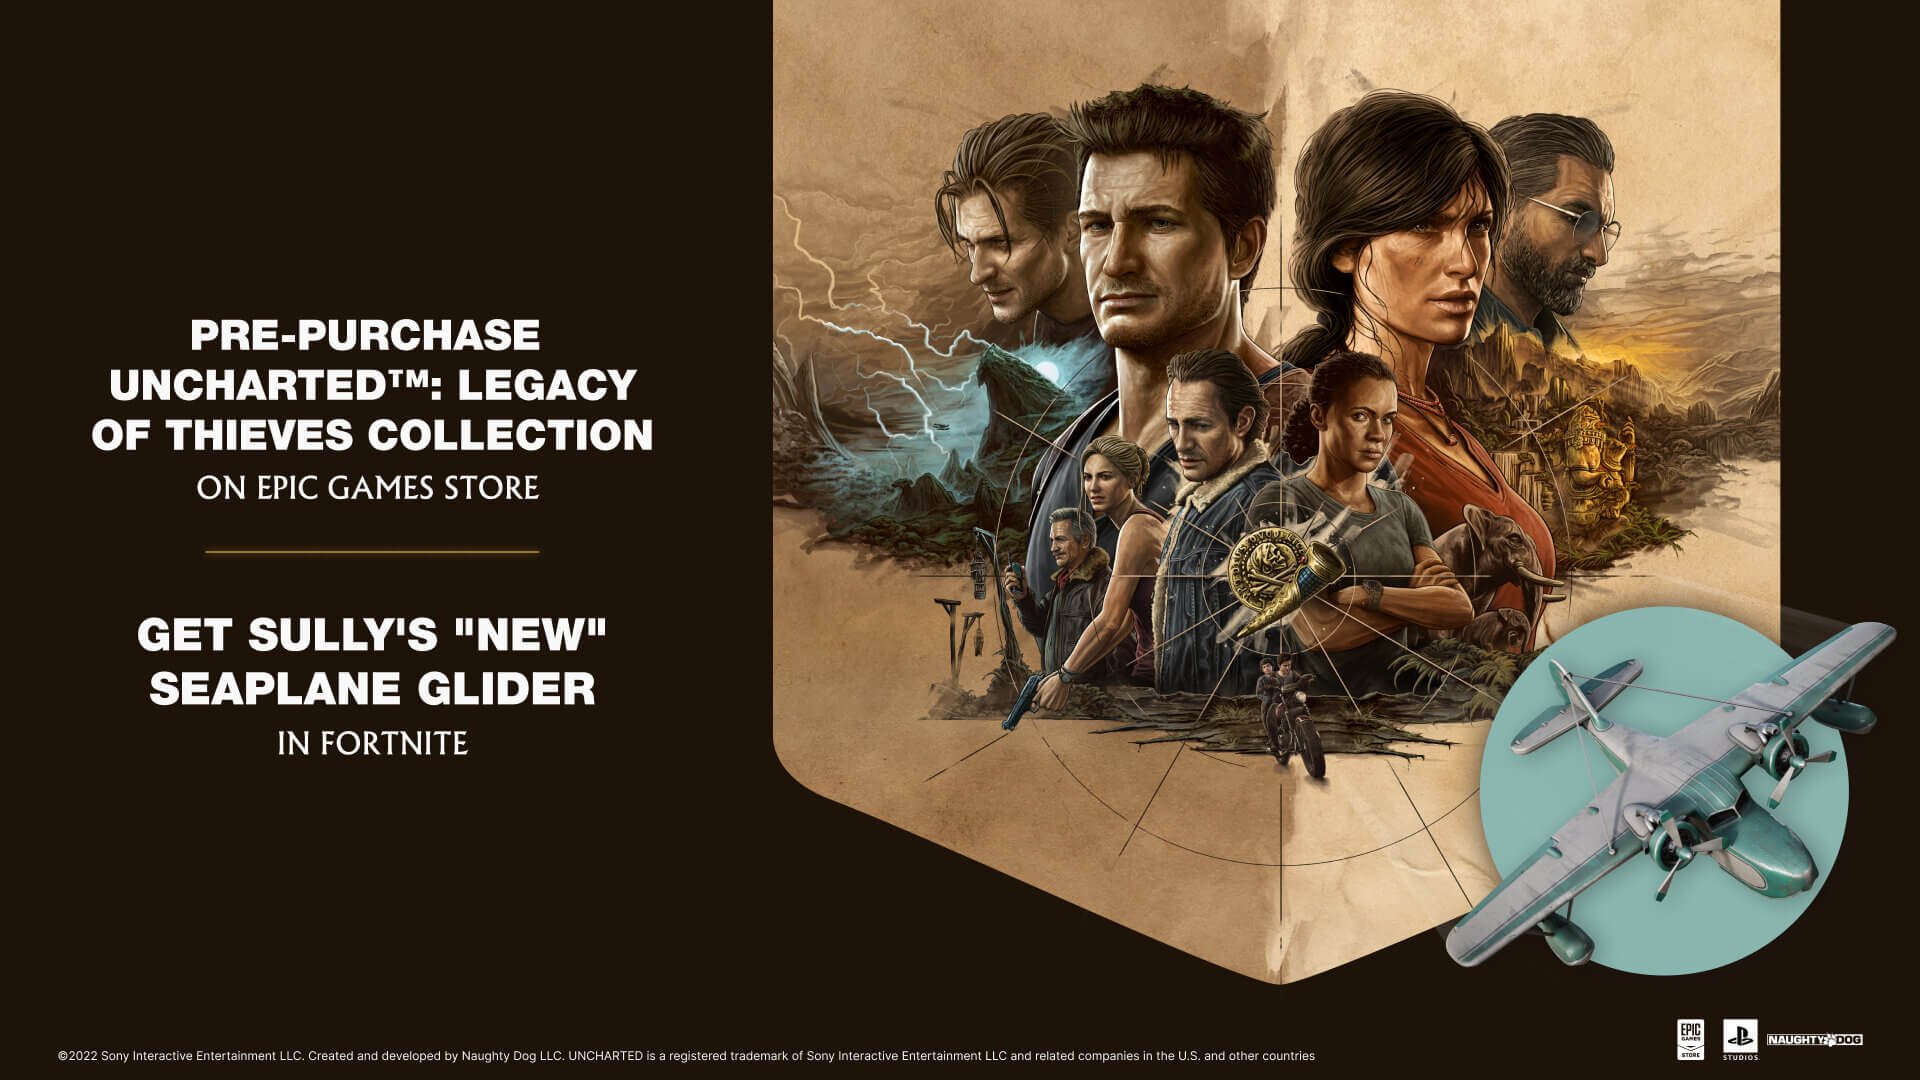 Legacy of thieves collection купить. Uncharted™: наследие воров. Uncharted: наследие воров. Коллекция. Legacy of Thieves collection. Игра Uncharted наследие воров.